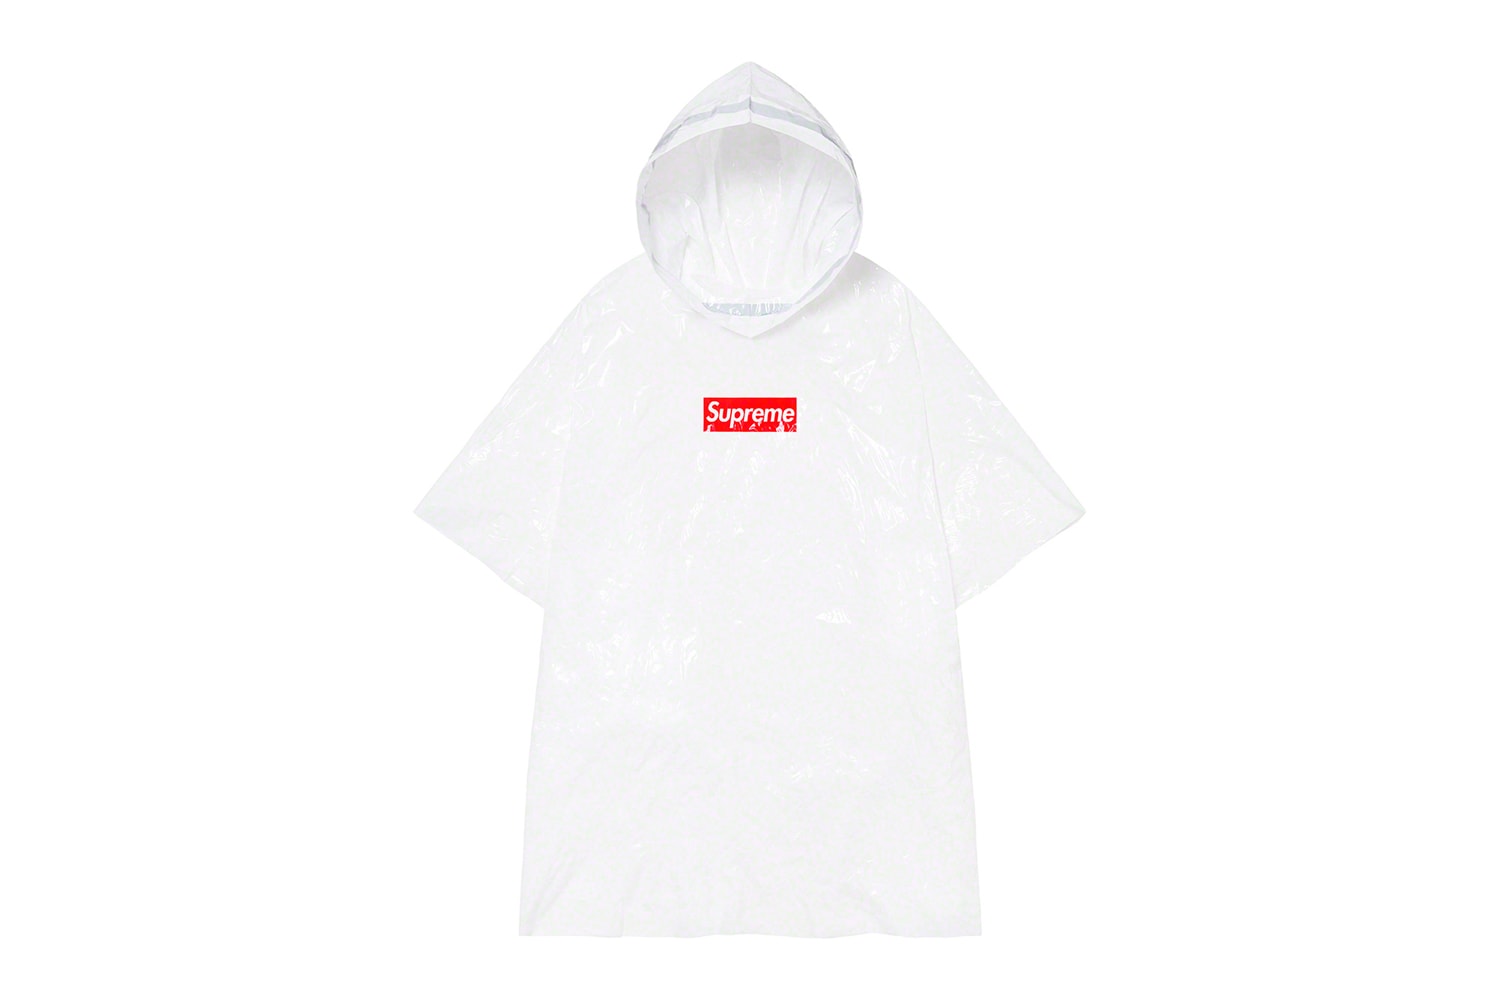 Supreme Spring/Summer 2020 Week 1 Online Release Drop List Palace Skateboards Week 3 HAVEN Afield Out Fxxking Rabbits FR2 CLOT LIFUL Fucking Awesome Awake NY Moncler 1952 Genius